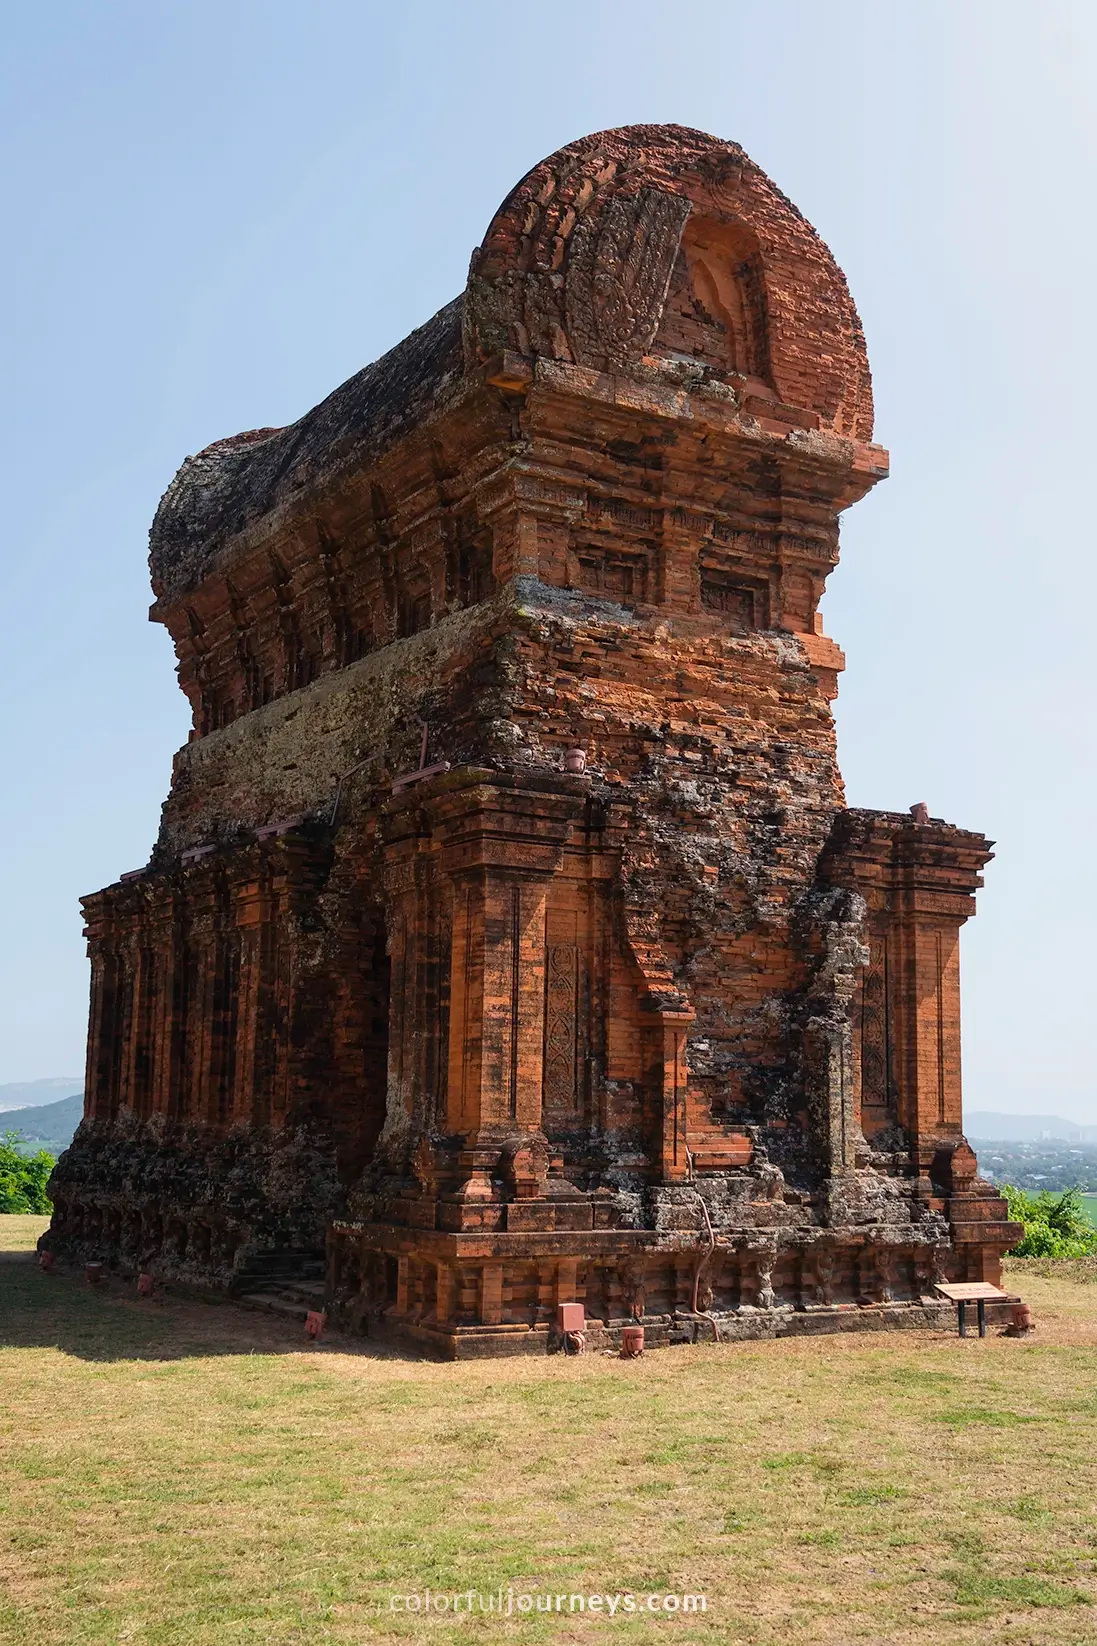 Banh It Cham towers in Quy Nhon, Vietnam